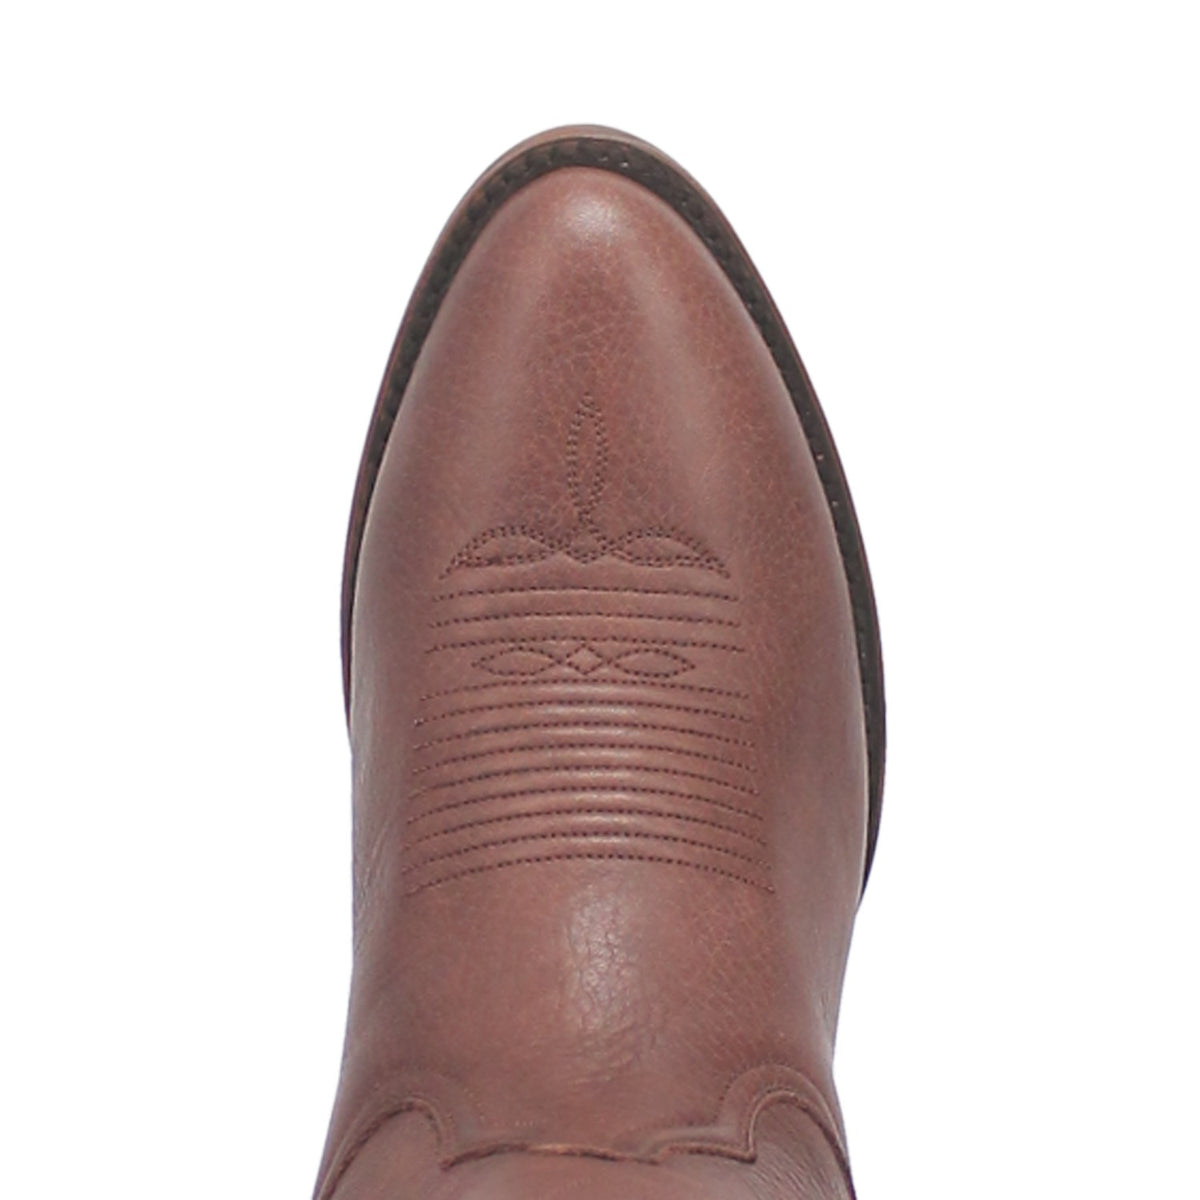 PIKE LEATHER BOOT Image